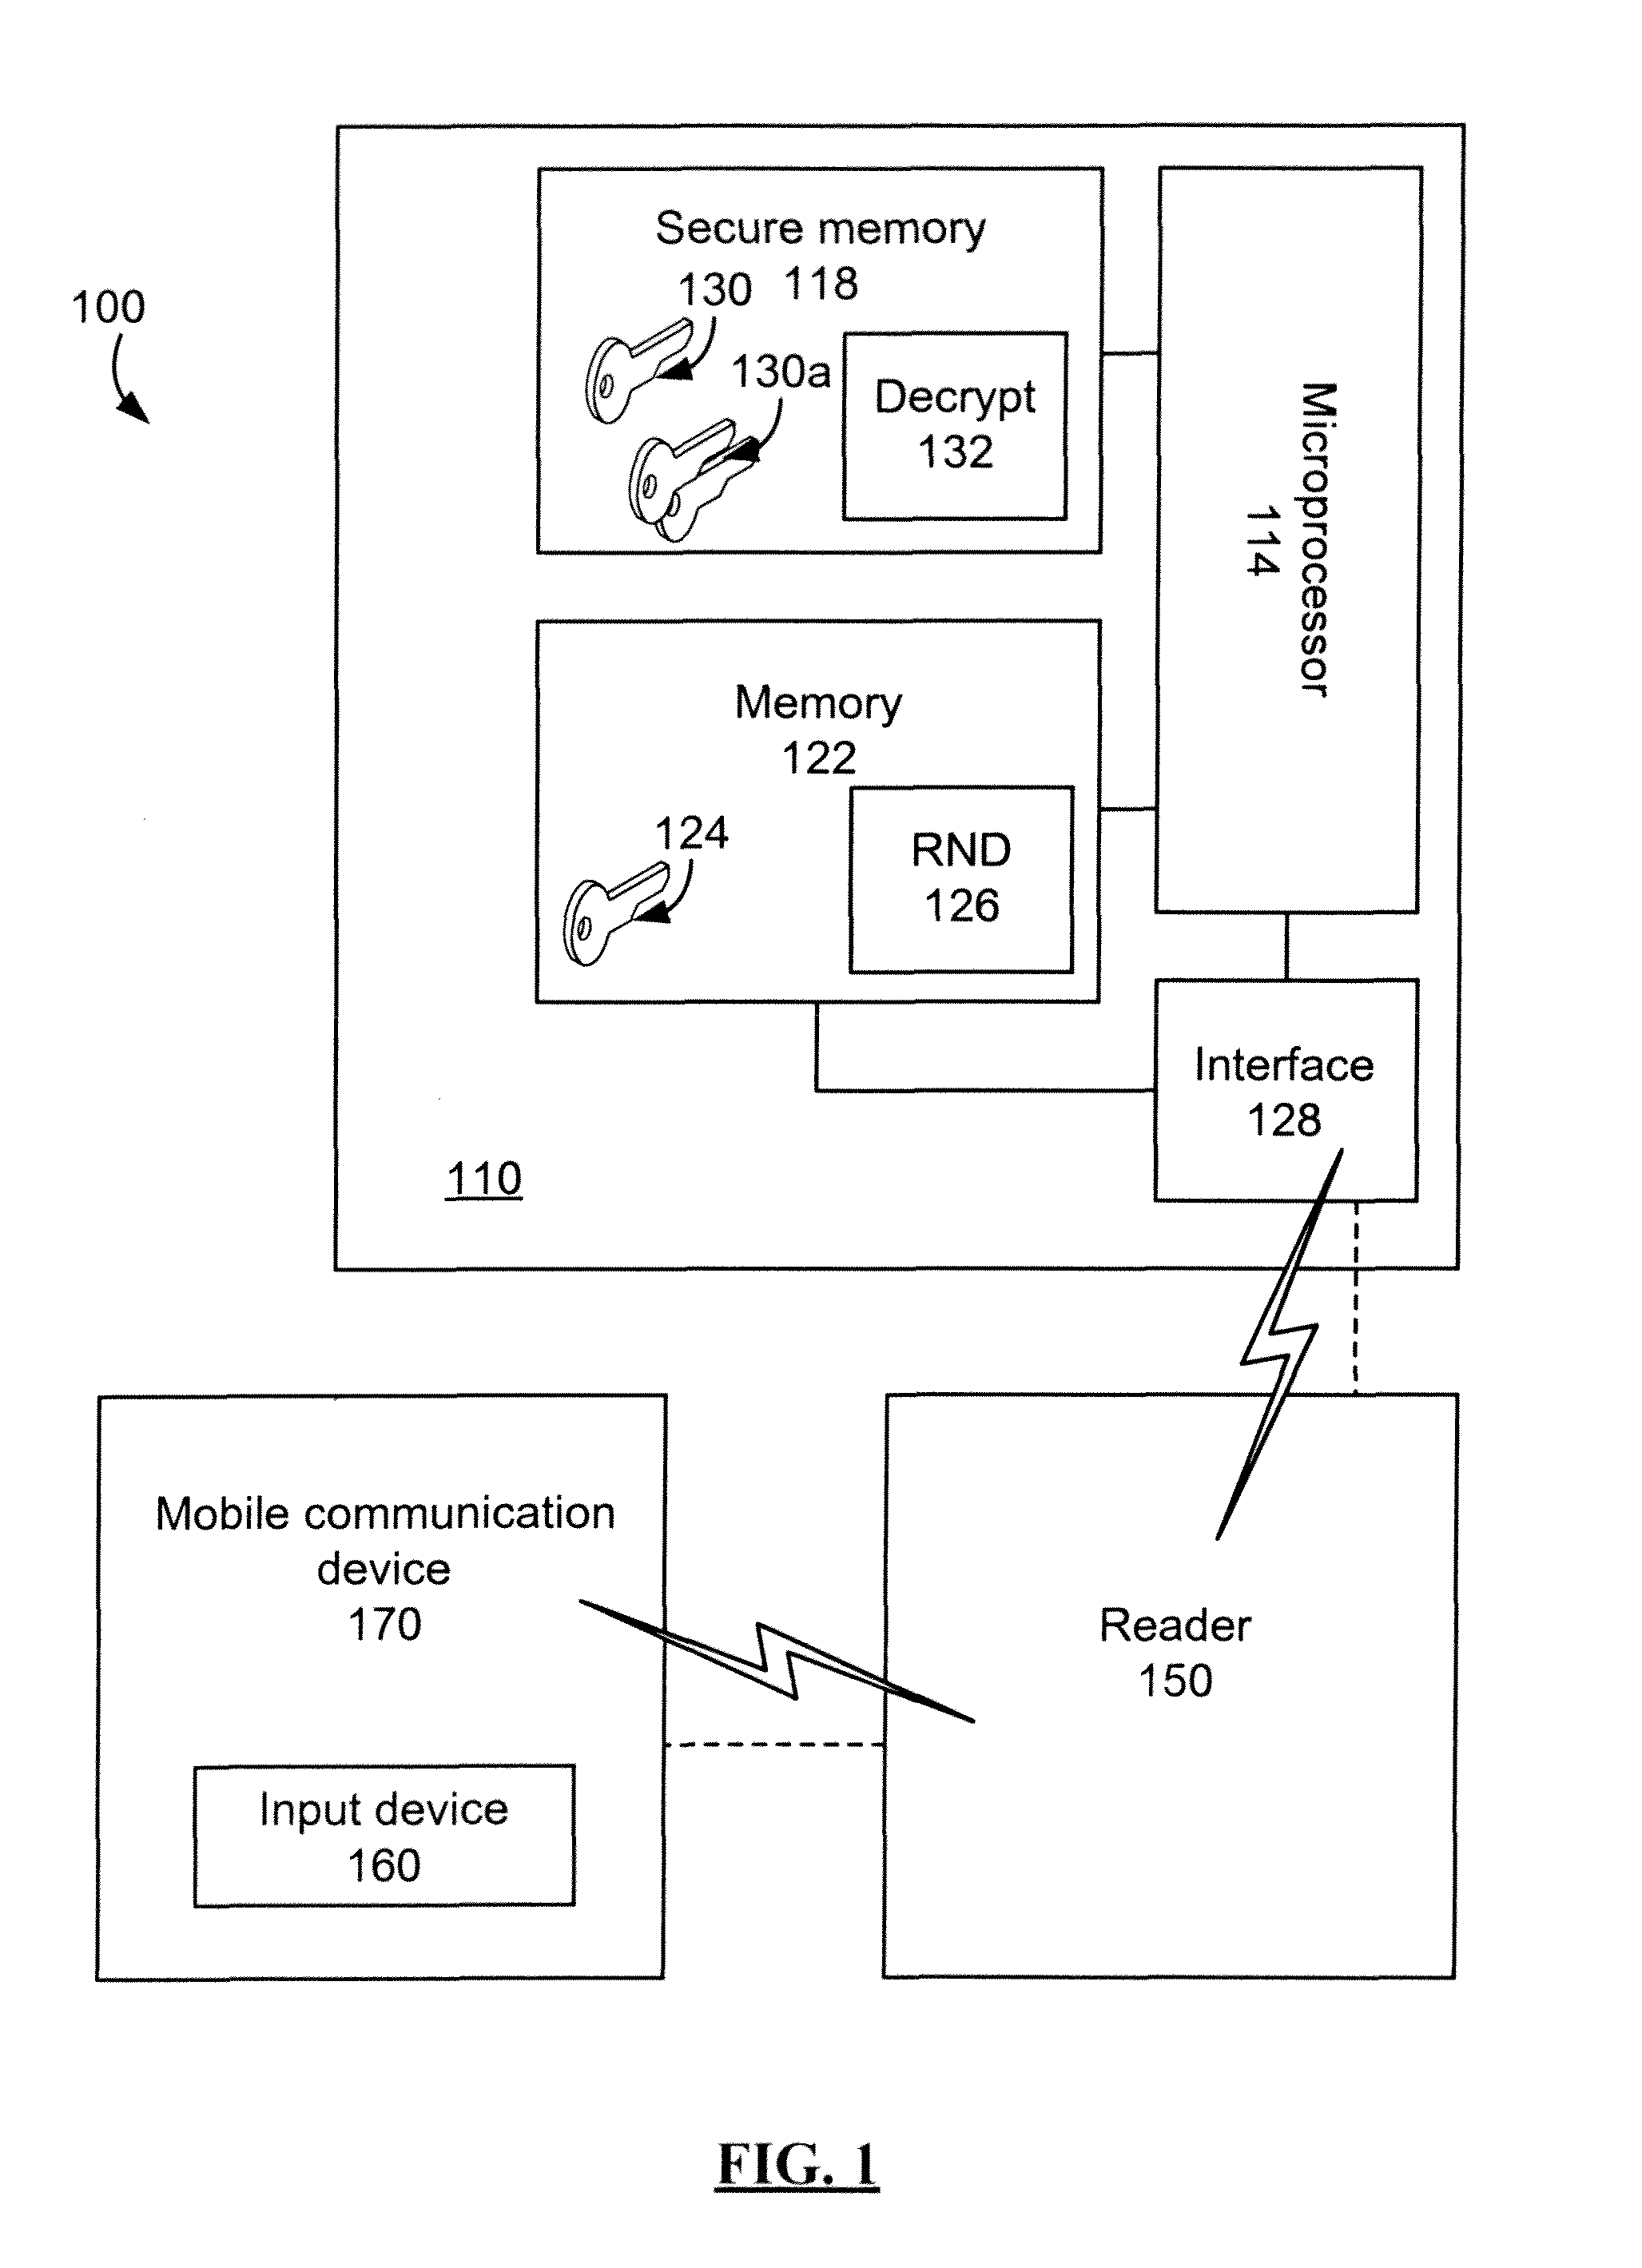 System and method for encrypted smart card PIN entry